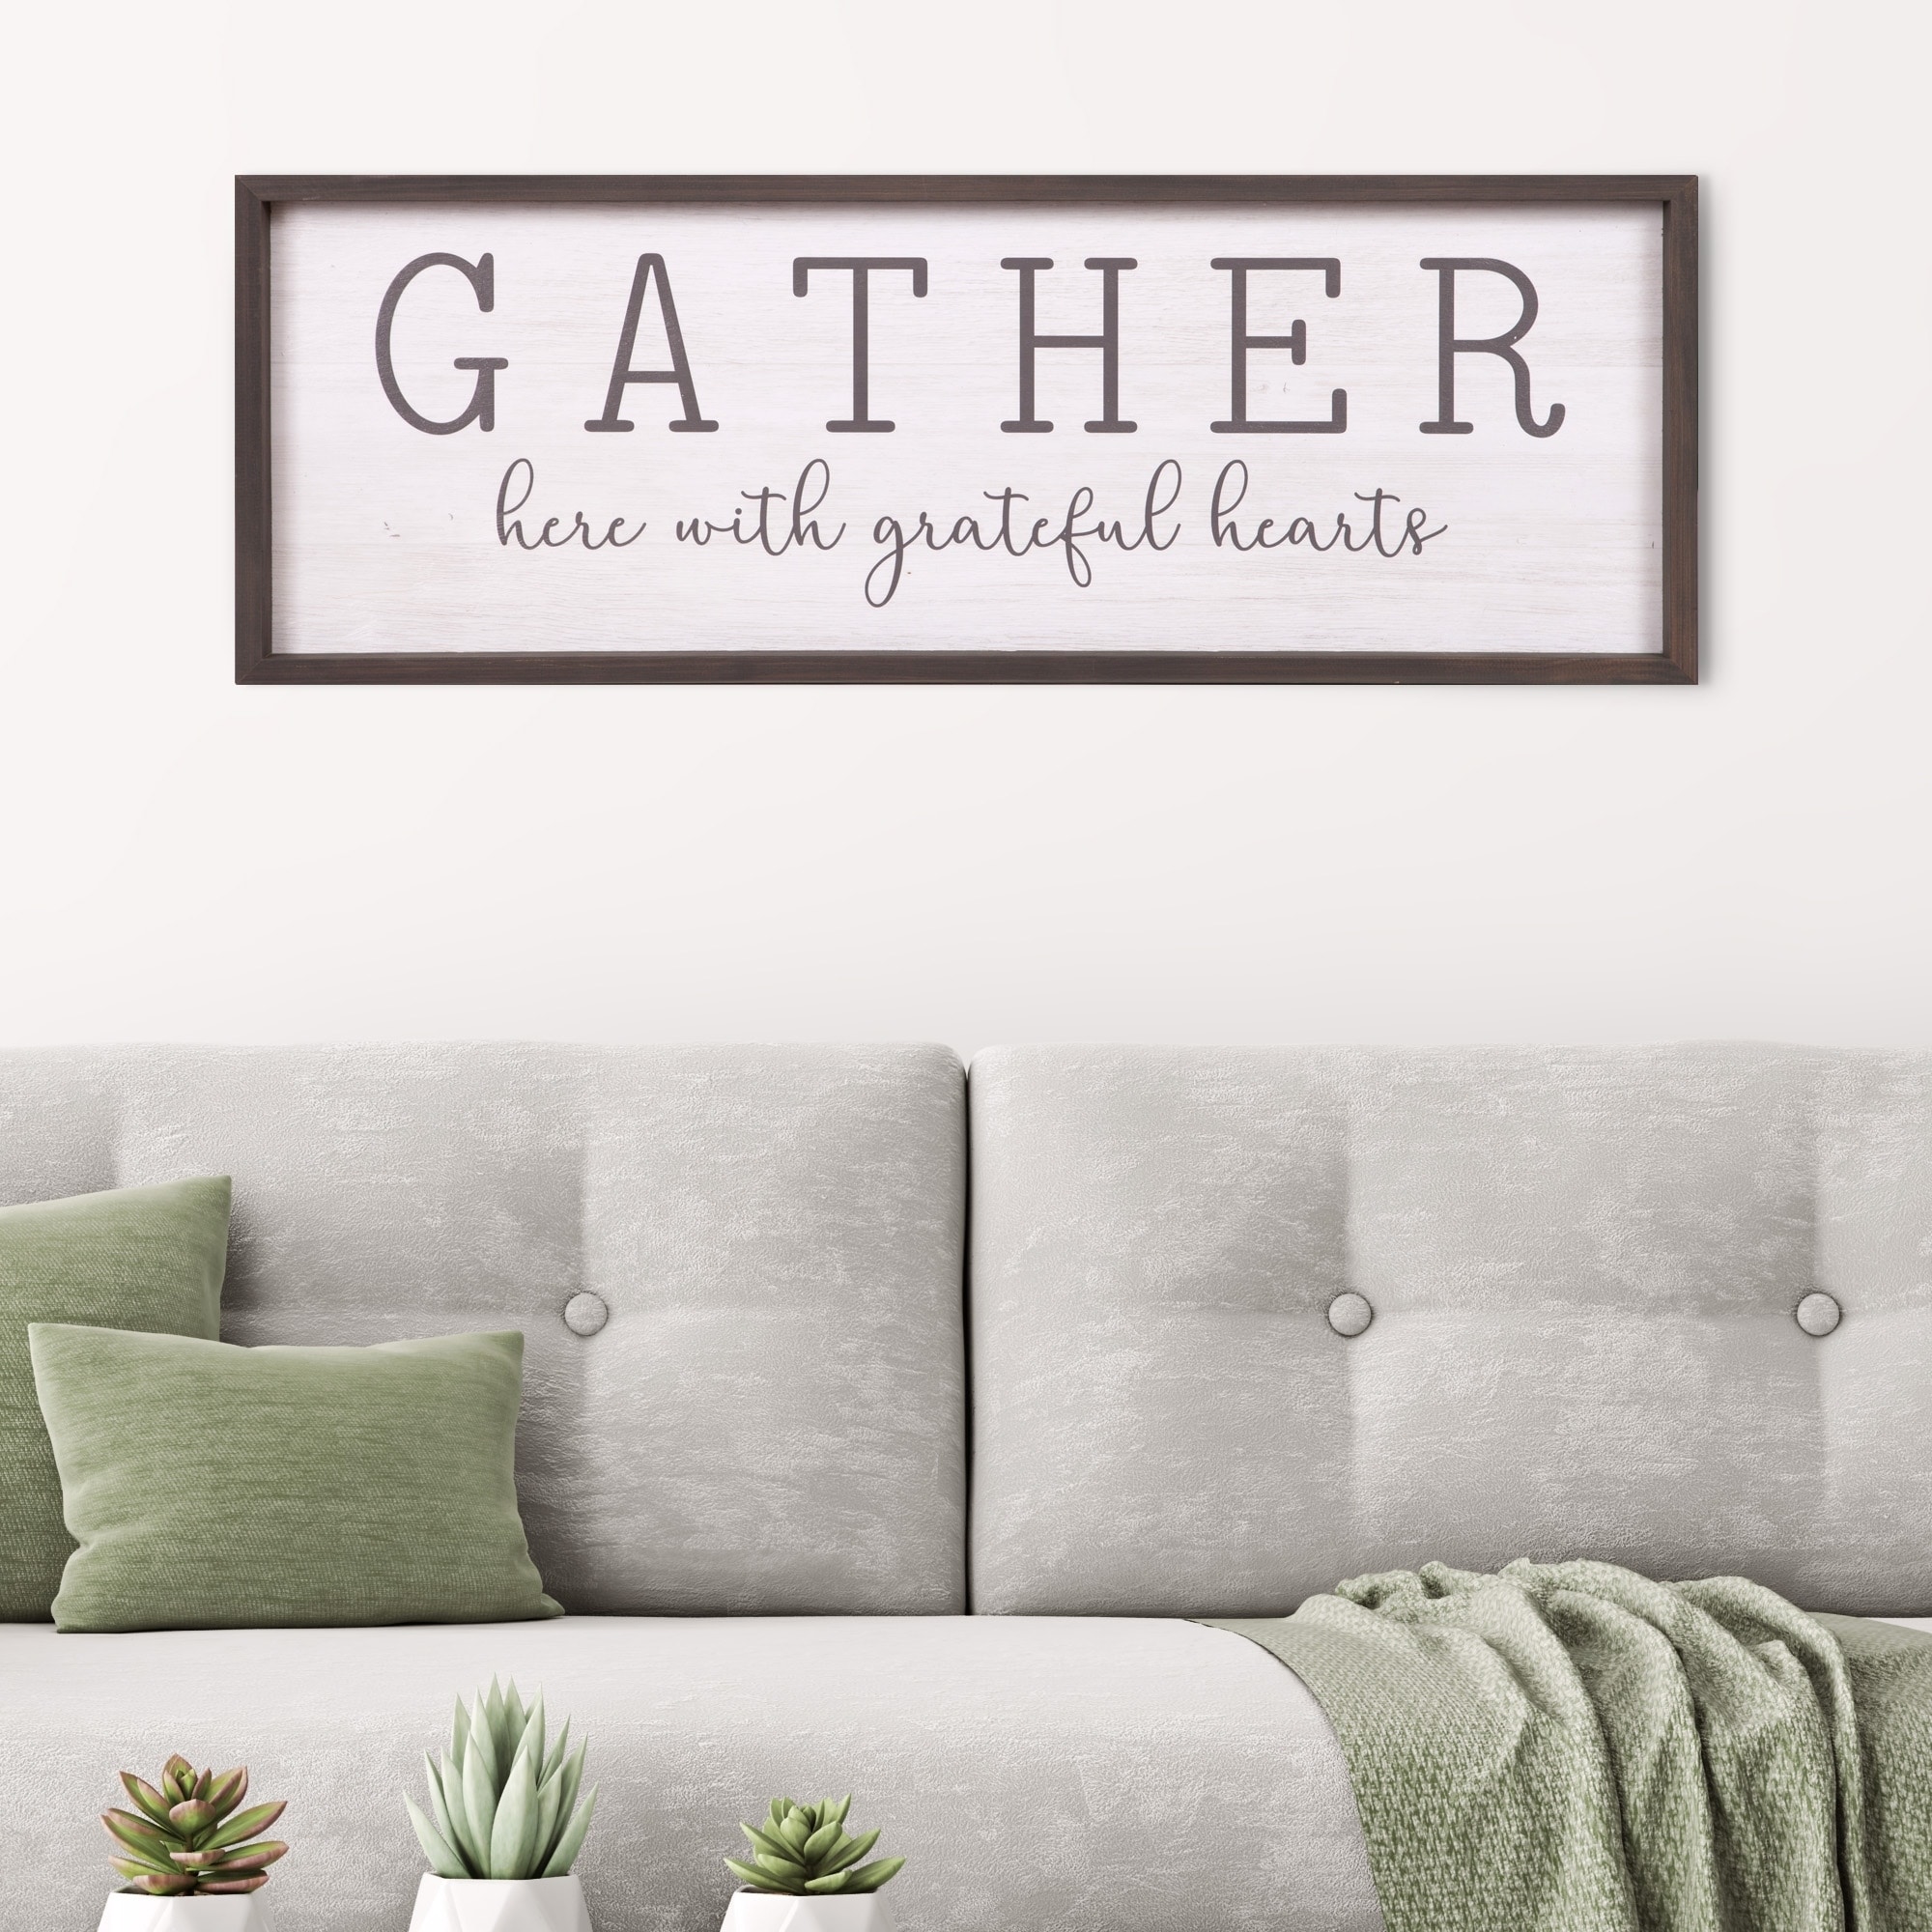 Shop Patton Wall Decor Gather With Grateful Hearts Rustic Wood Framed Wall Art Decor 12x36 White Overstock 24082395